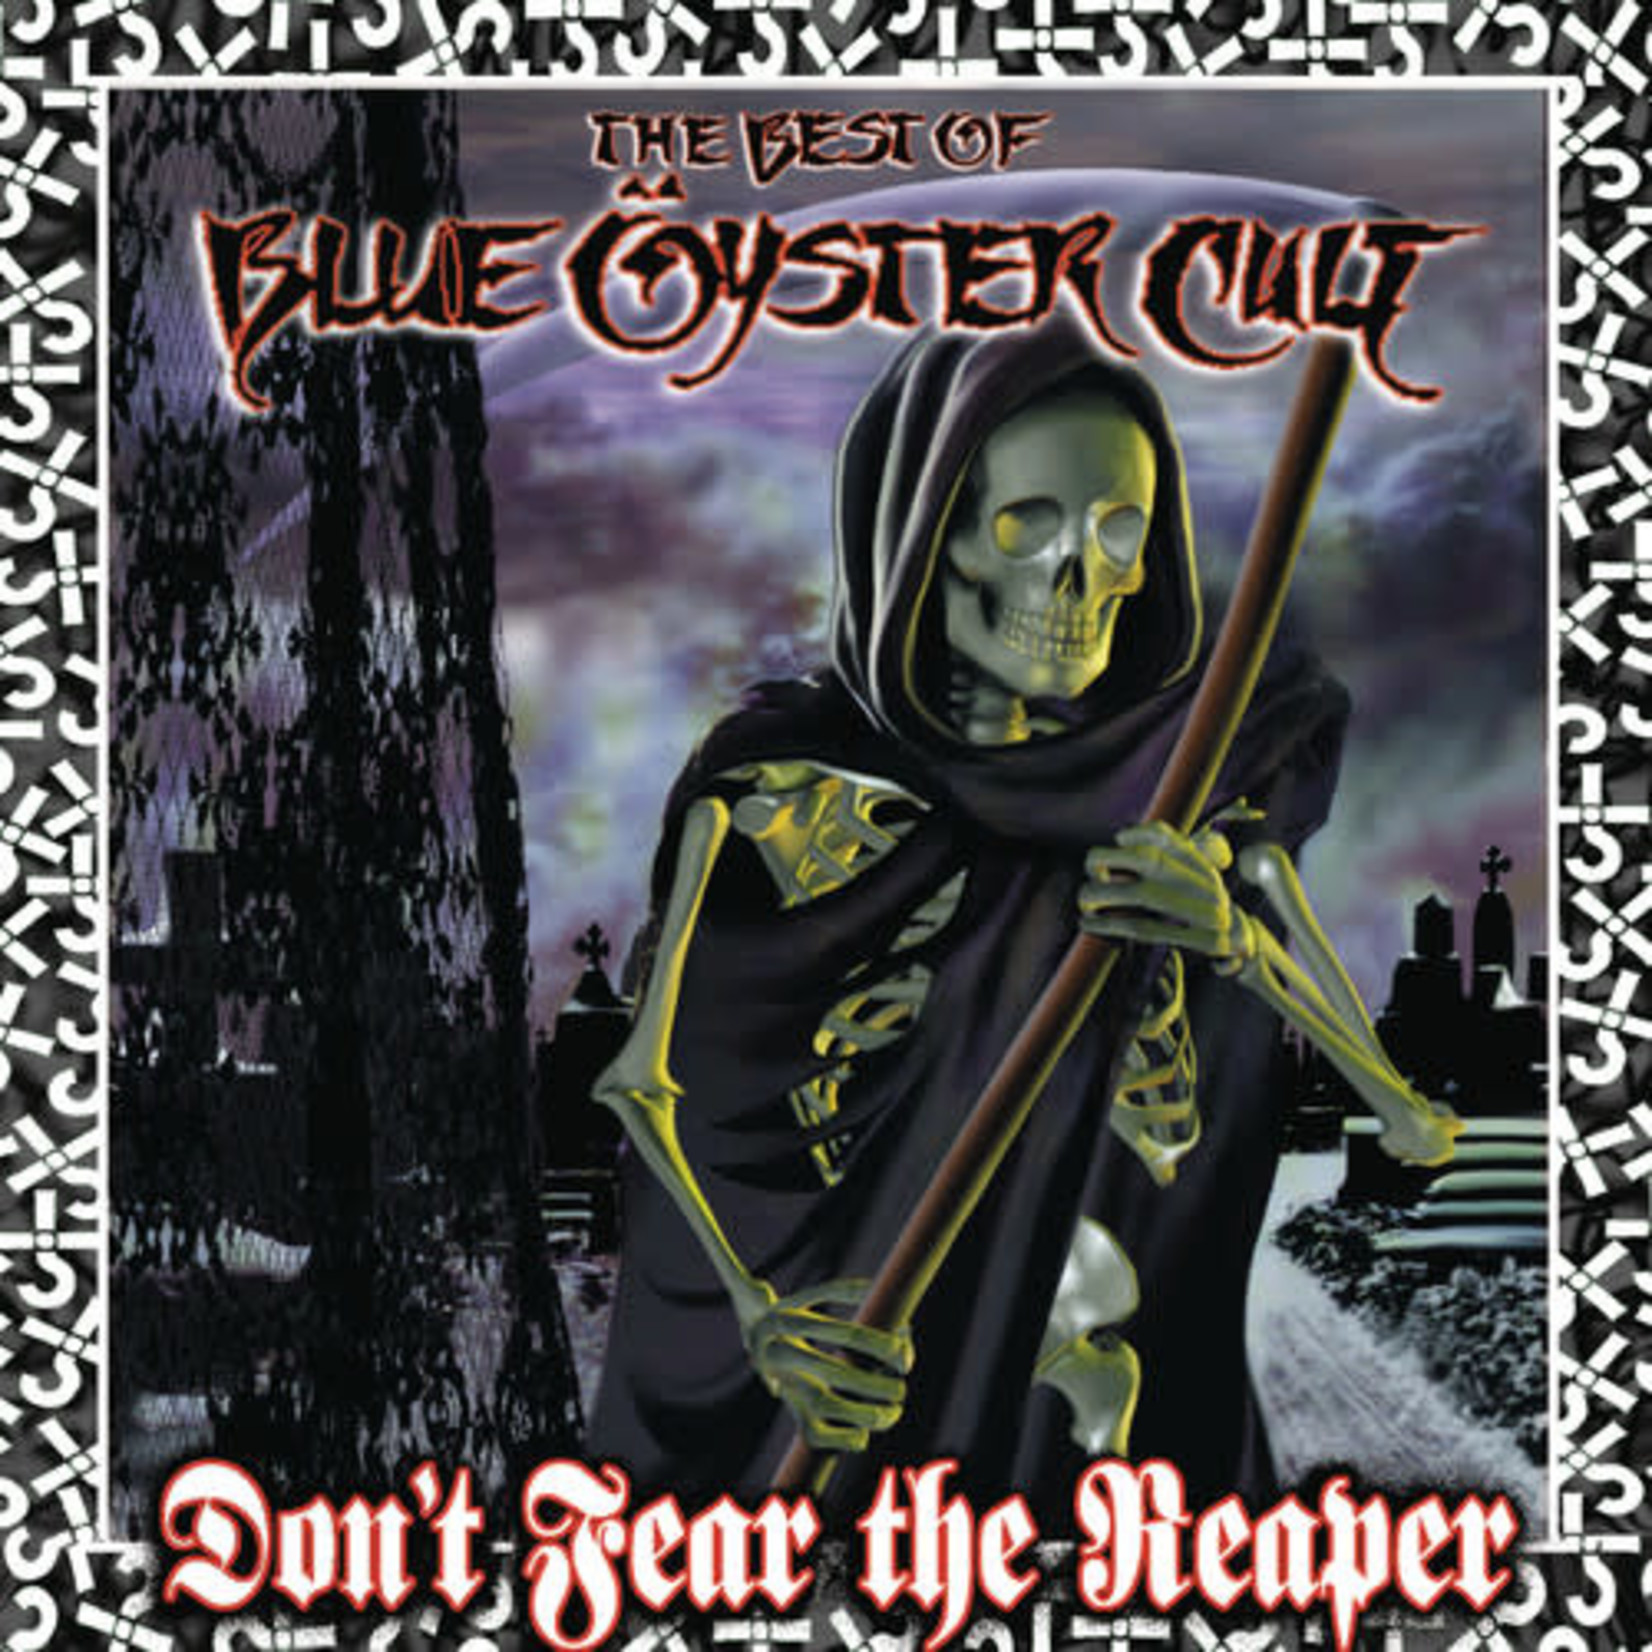 Blue Oyster Cult - Don't Fear The Reaper: The Best Of Blue Oyster Cult [CD]